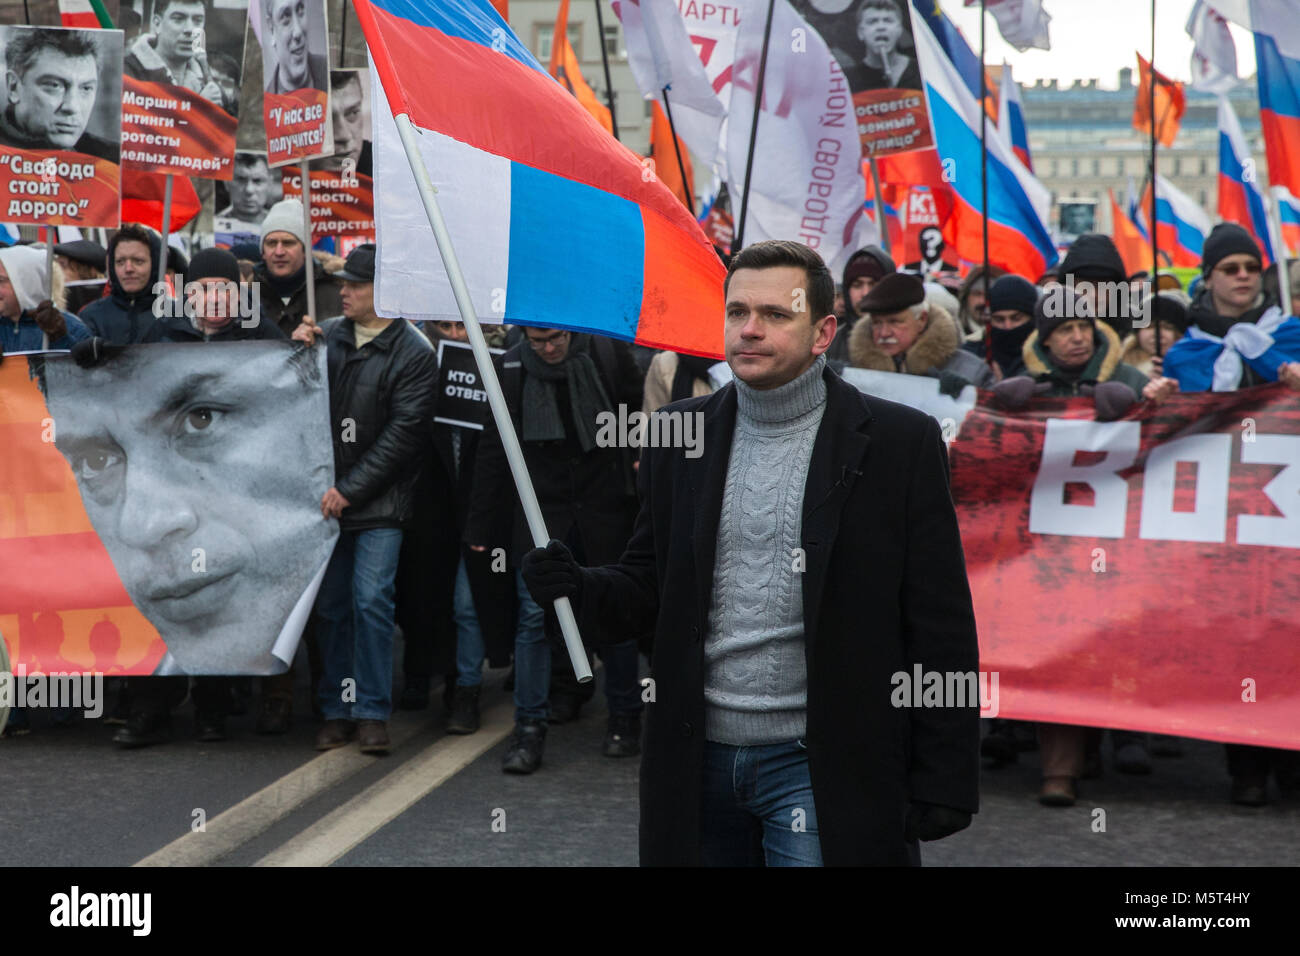 Moscow, Russia. 25th February 2018. Chairman of Moscow's Krasnoselsky District Council, opposition activist Ilya Yashin (front) takes part in a march in Moscow's Prospekt Akademika Sakharova Street in memory of Russian politician and opposition leader Boris Nemtsov on the eve of the 3rd anniversary of his death. Boris Nemtsov was shot dead on Bolshoi Moskvoretsky Bridge in the evening of February 27, 2015. Credit: Victor Vytolskiy/Alamy Live News Stock Photo